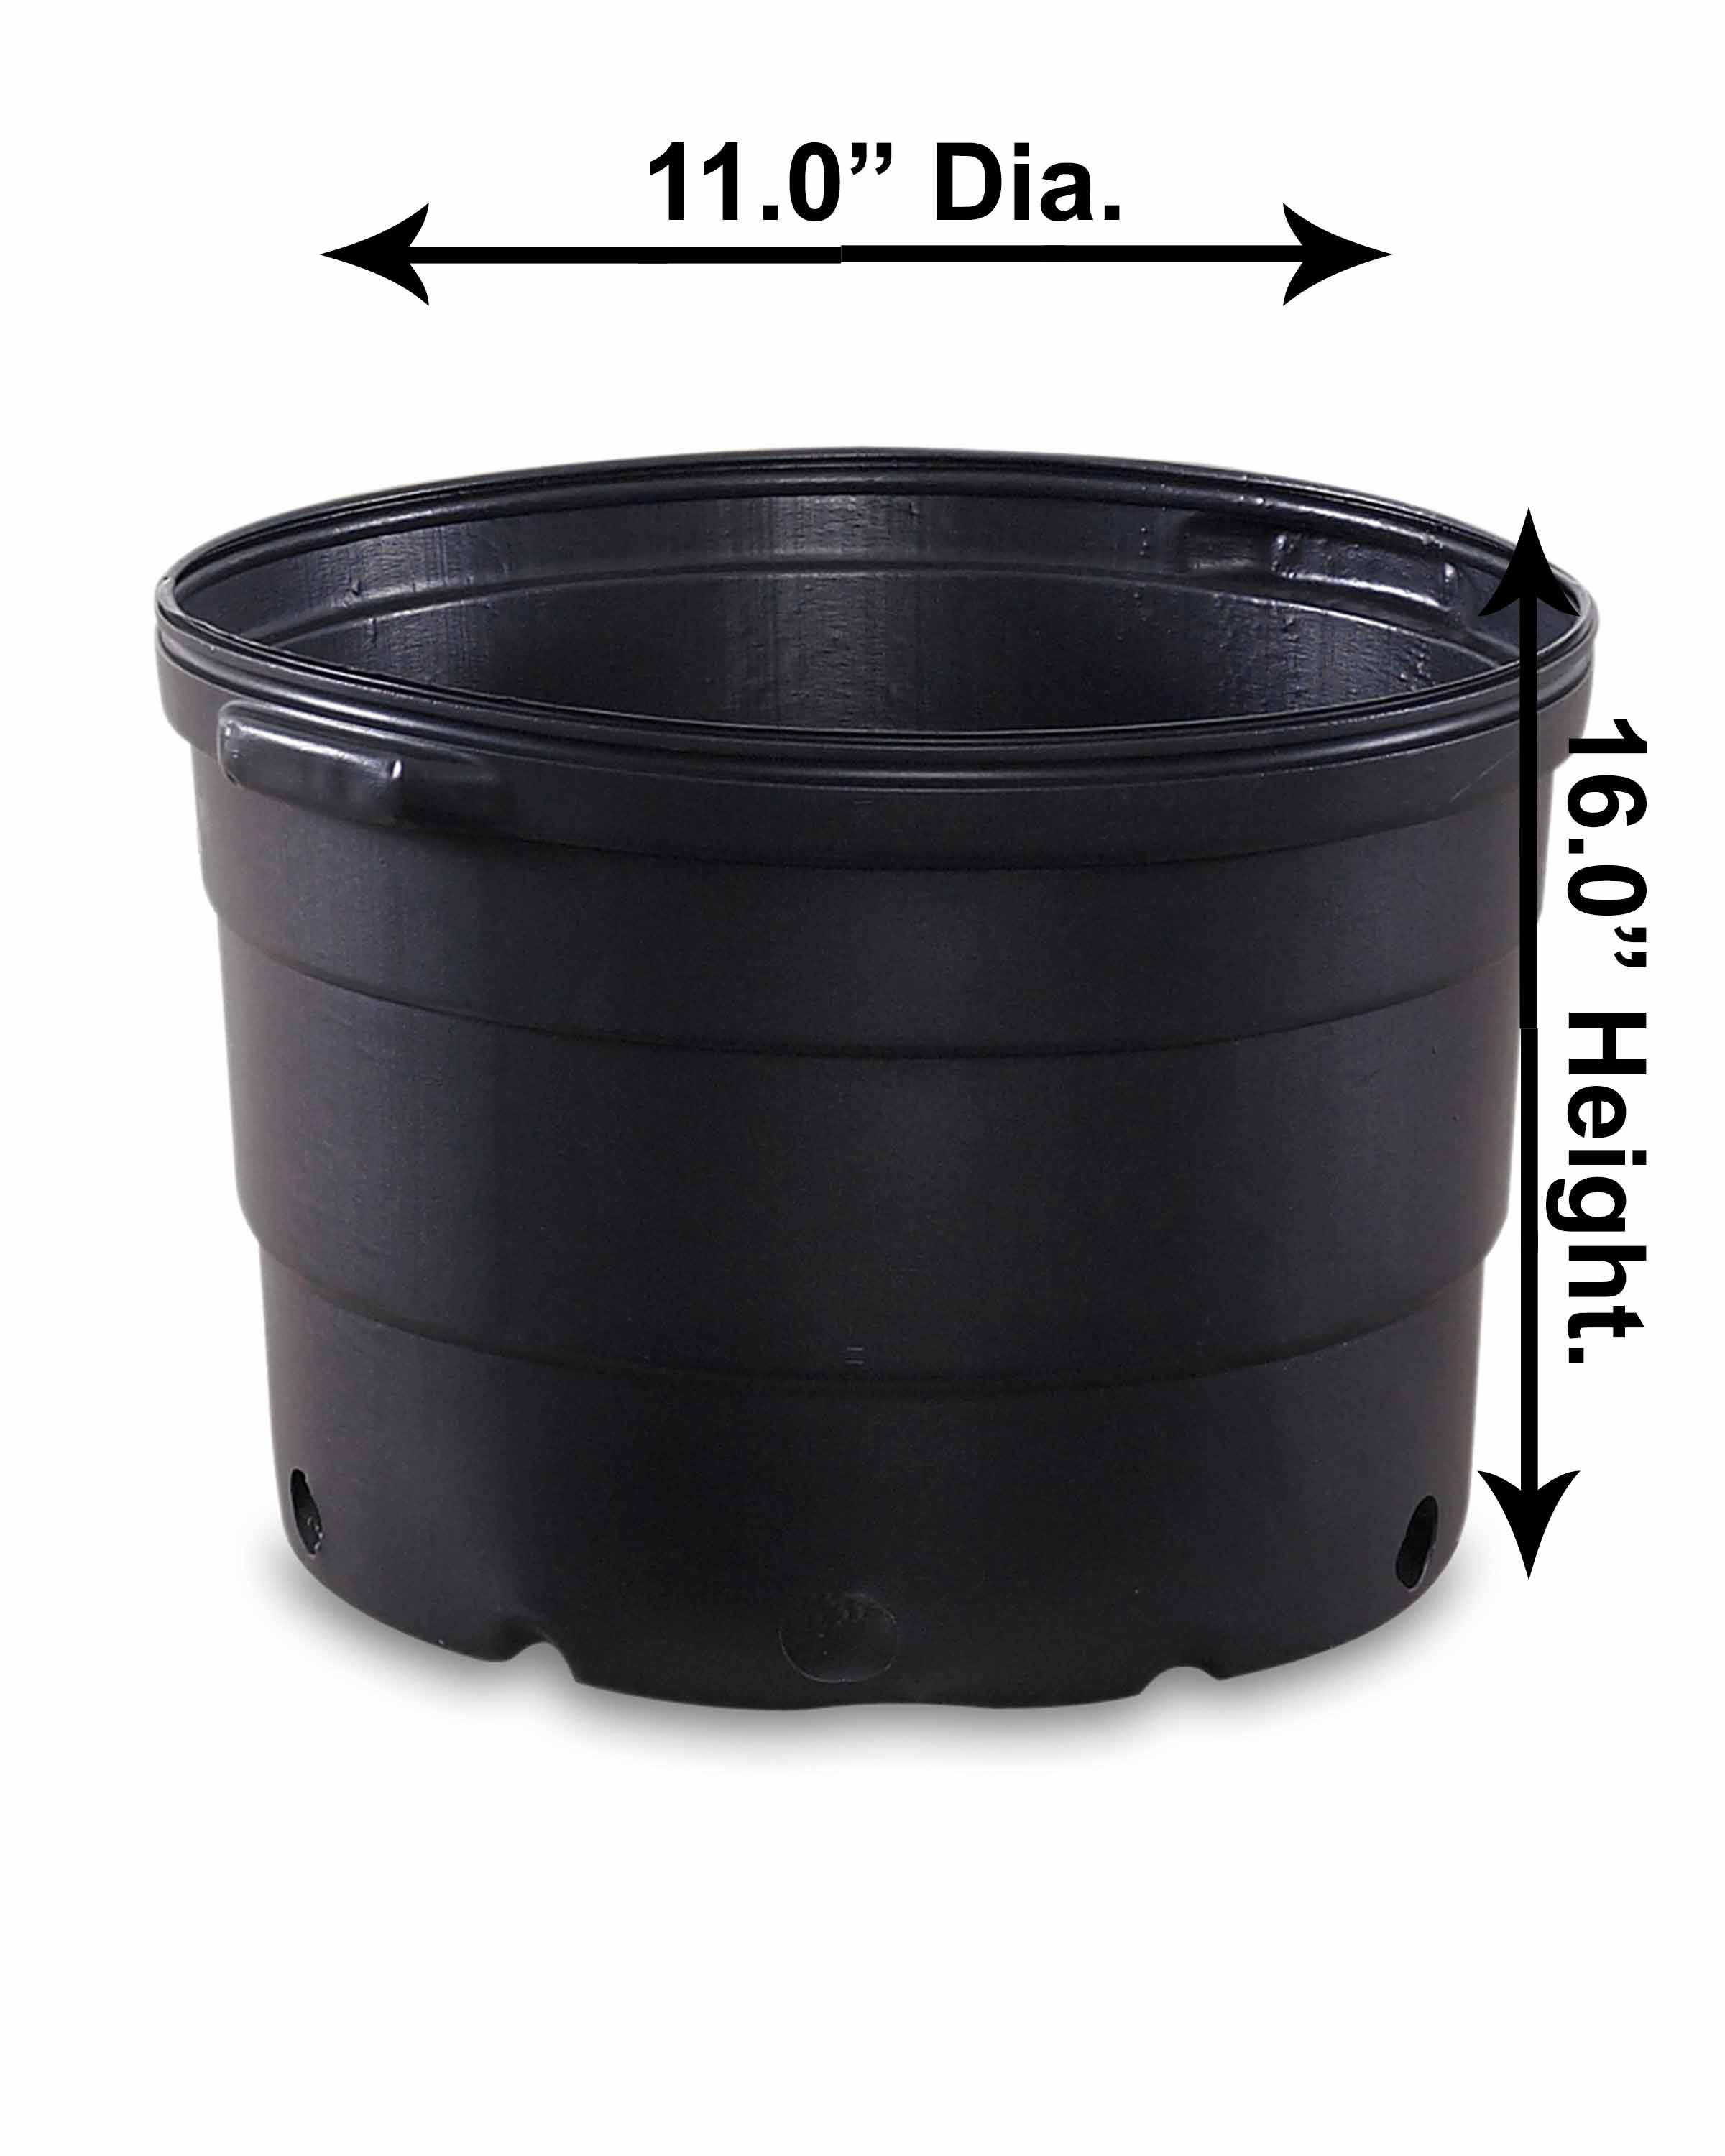 Squat Injection Molded Pot 10 Gal 